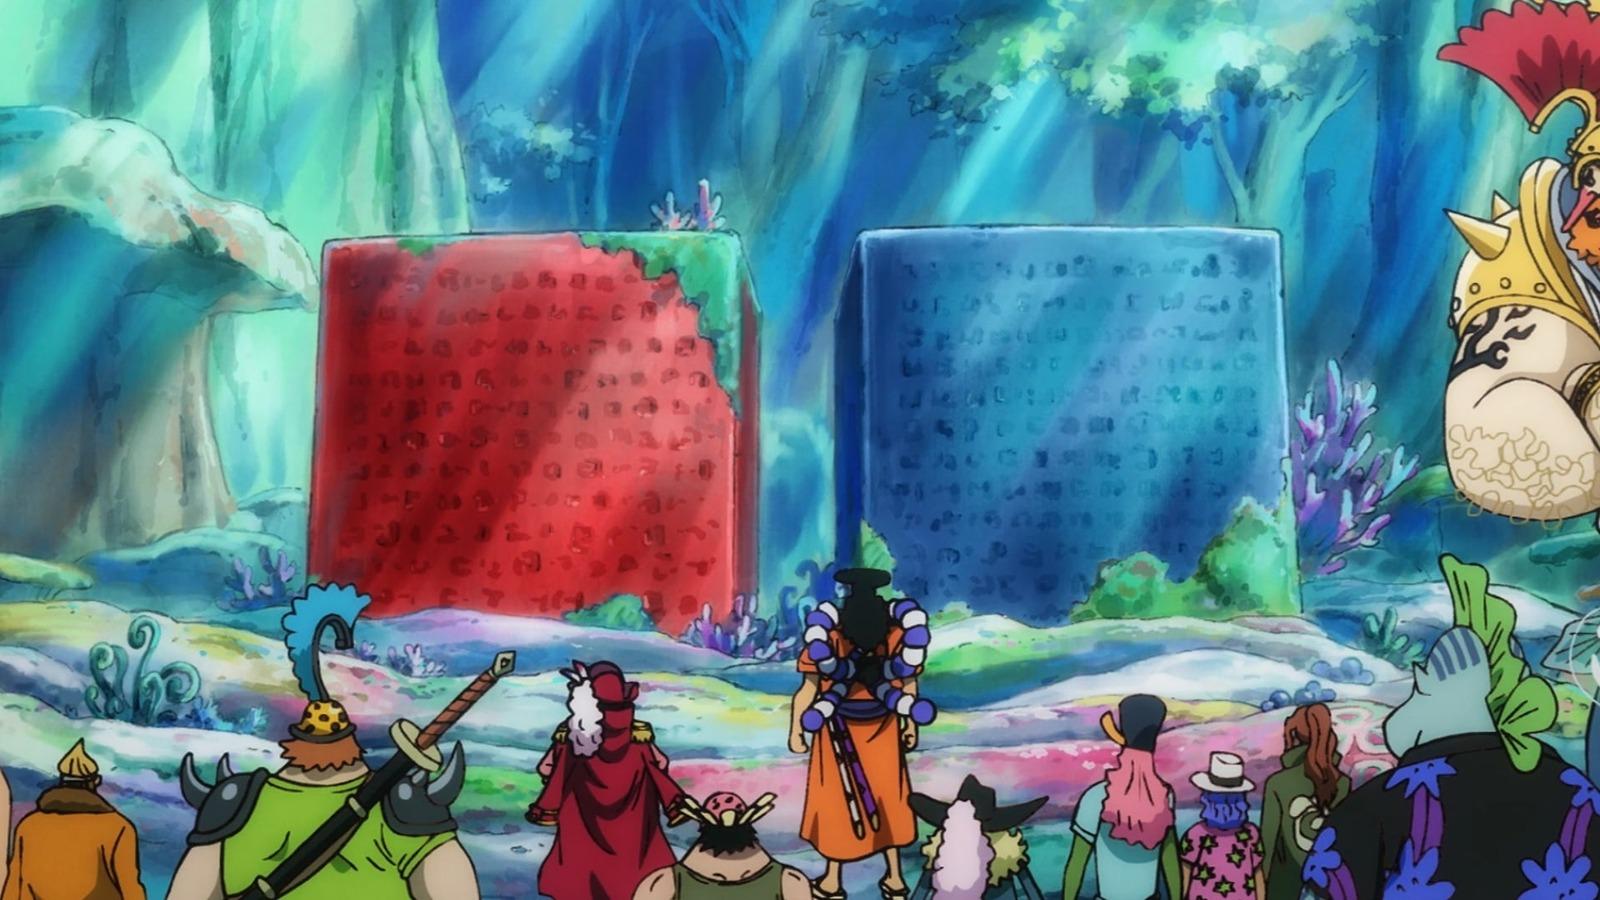 An image of Road Poneglyph in One Piece